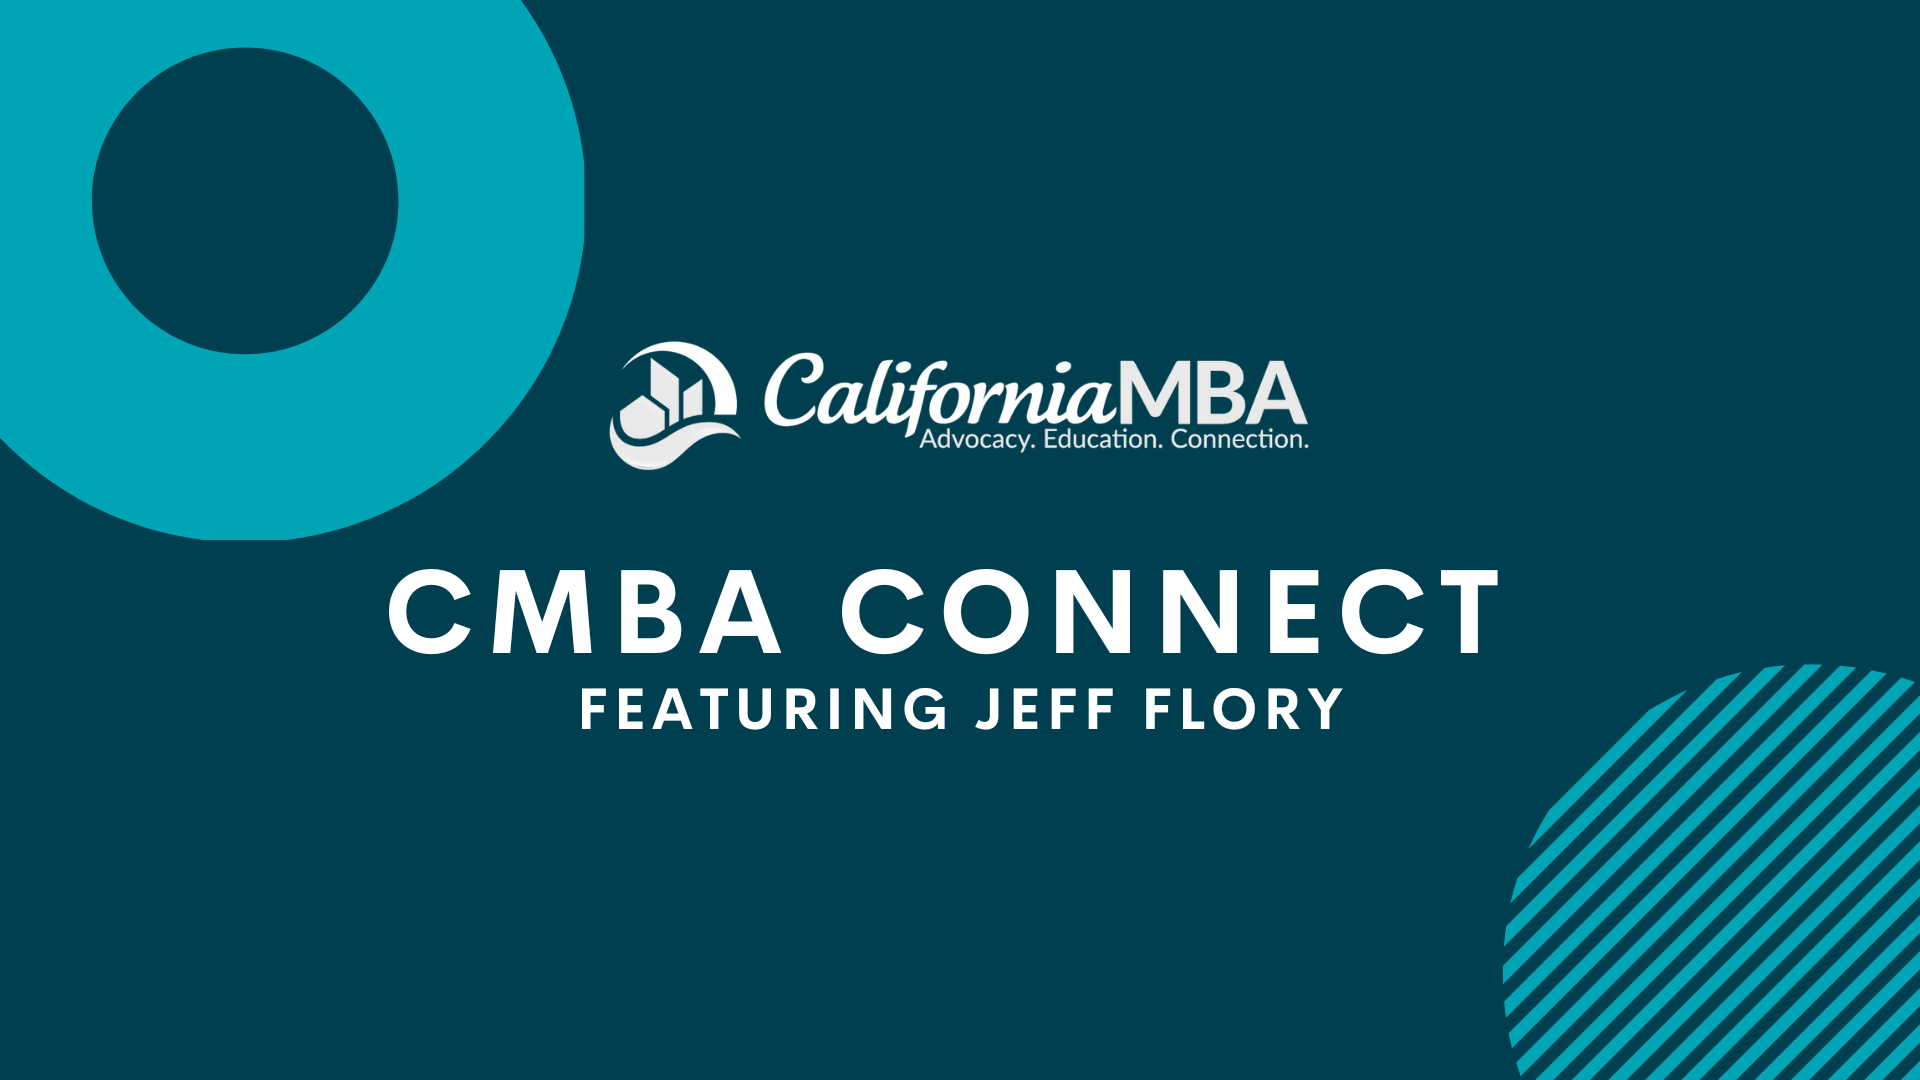 CMBA Connect with Jeff Flory